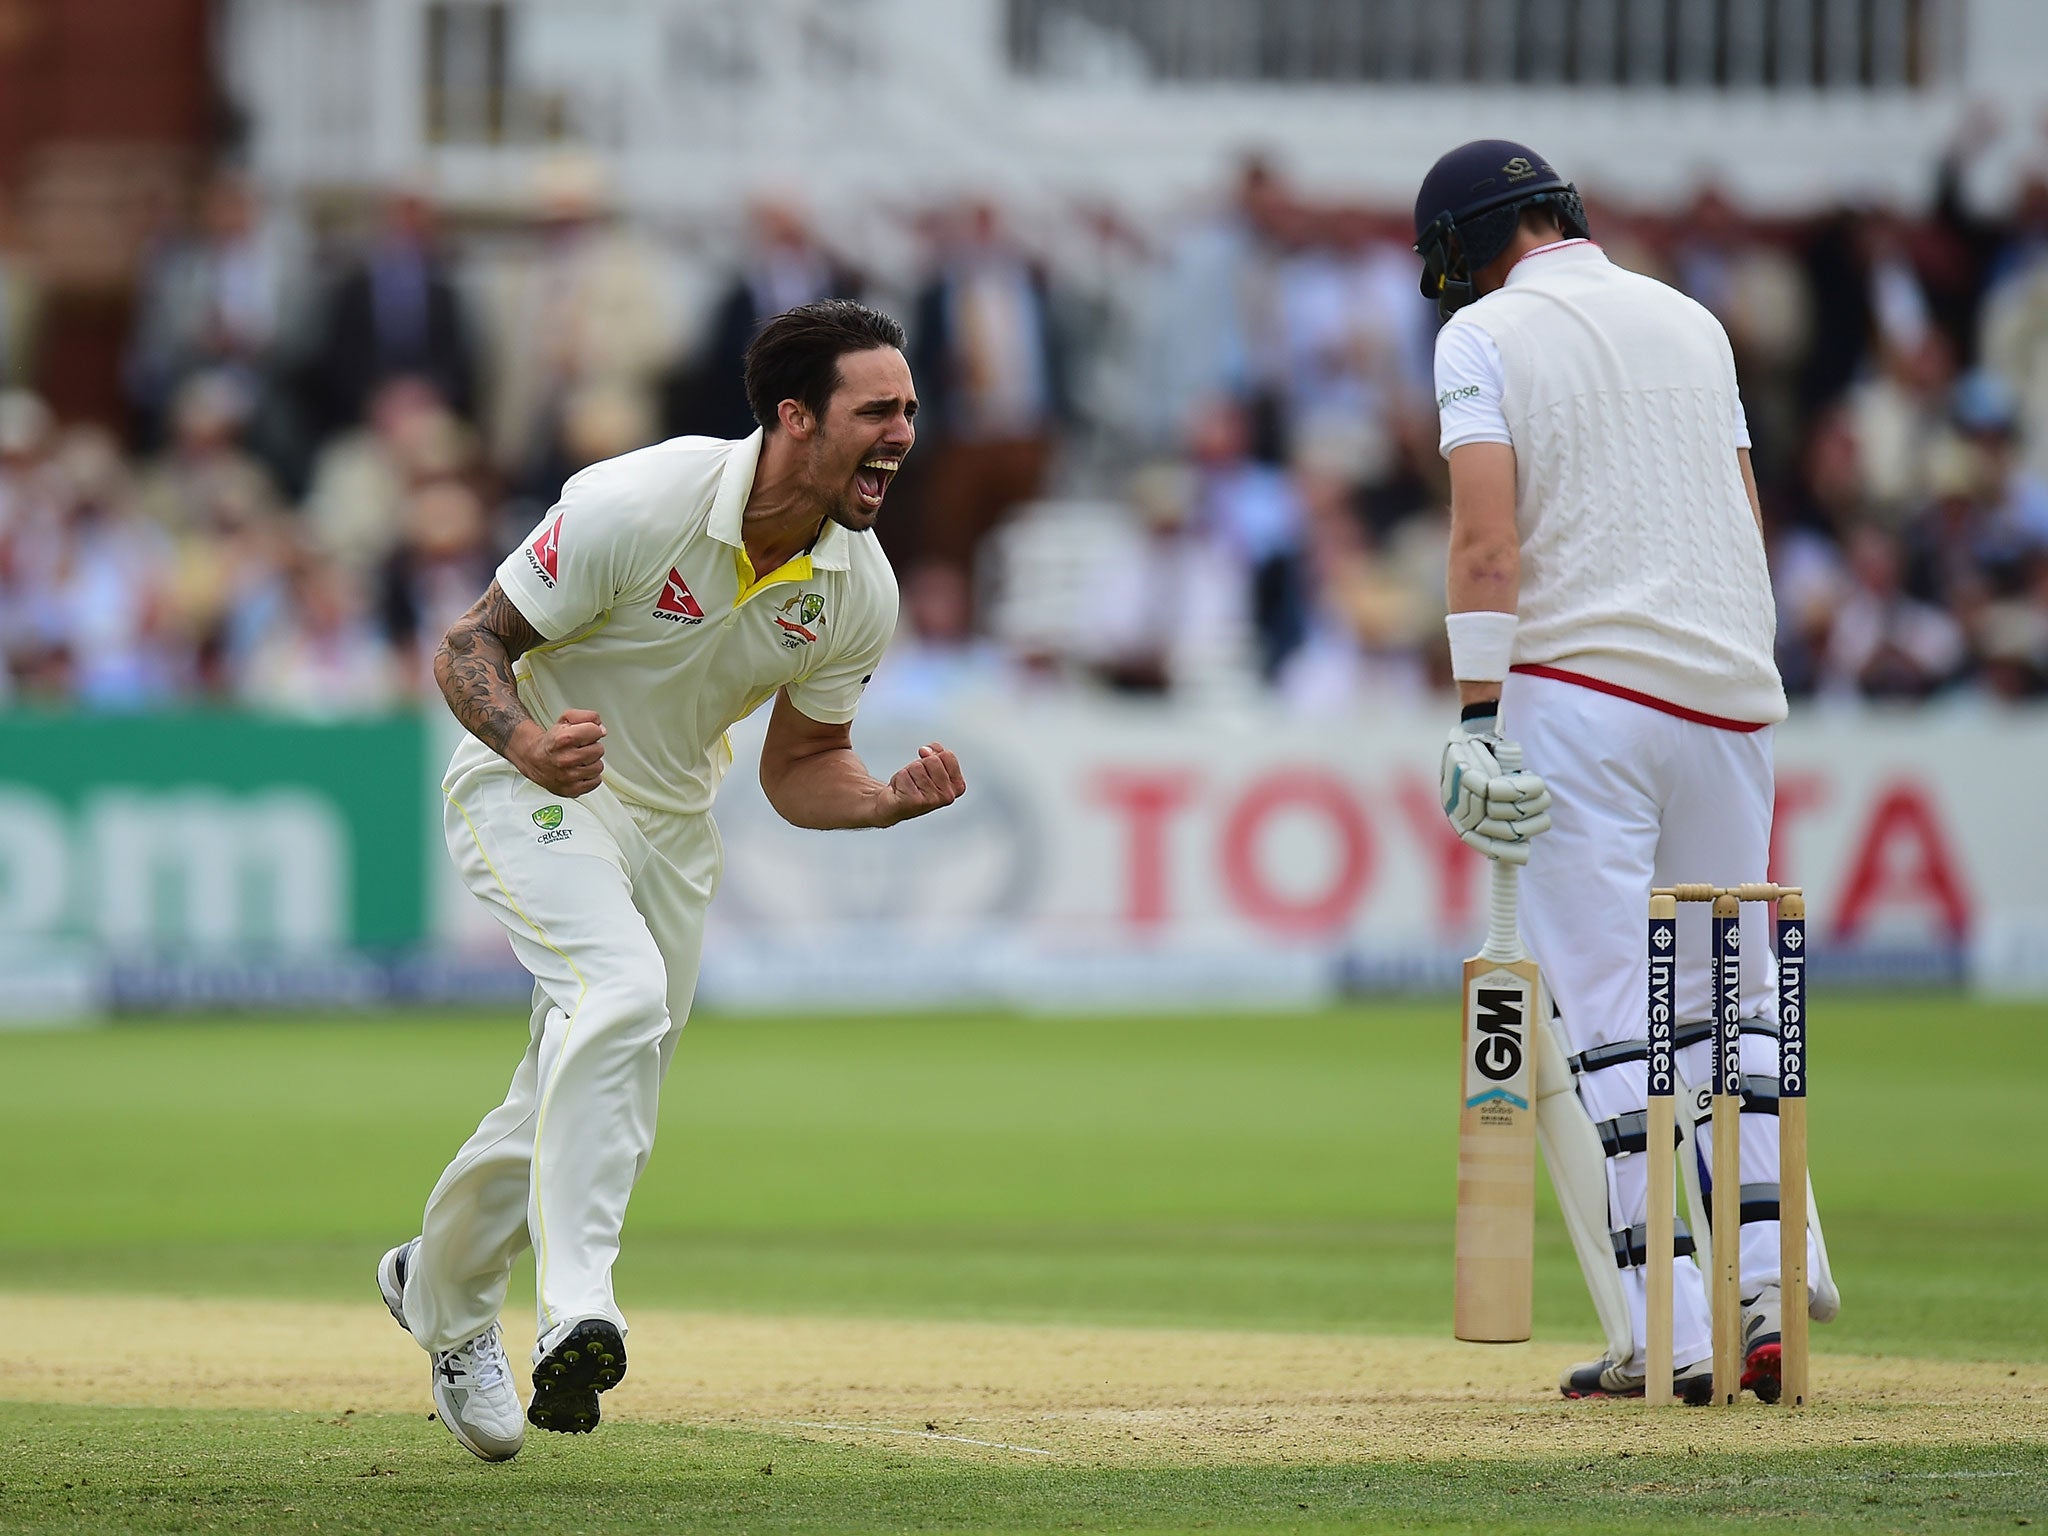 Mitchell Johnson of Australia celebrates after taking the wicket of Joe Root